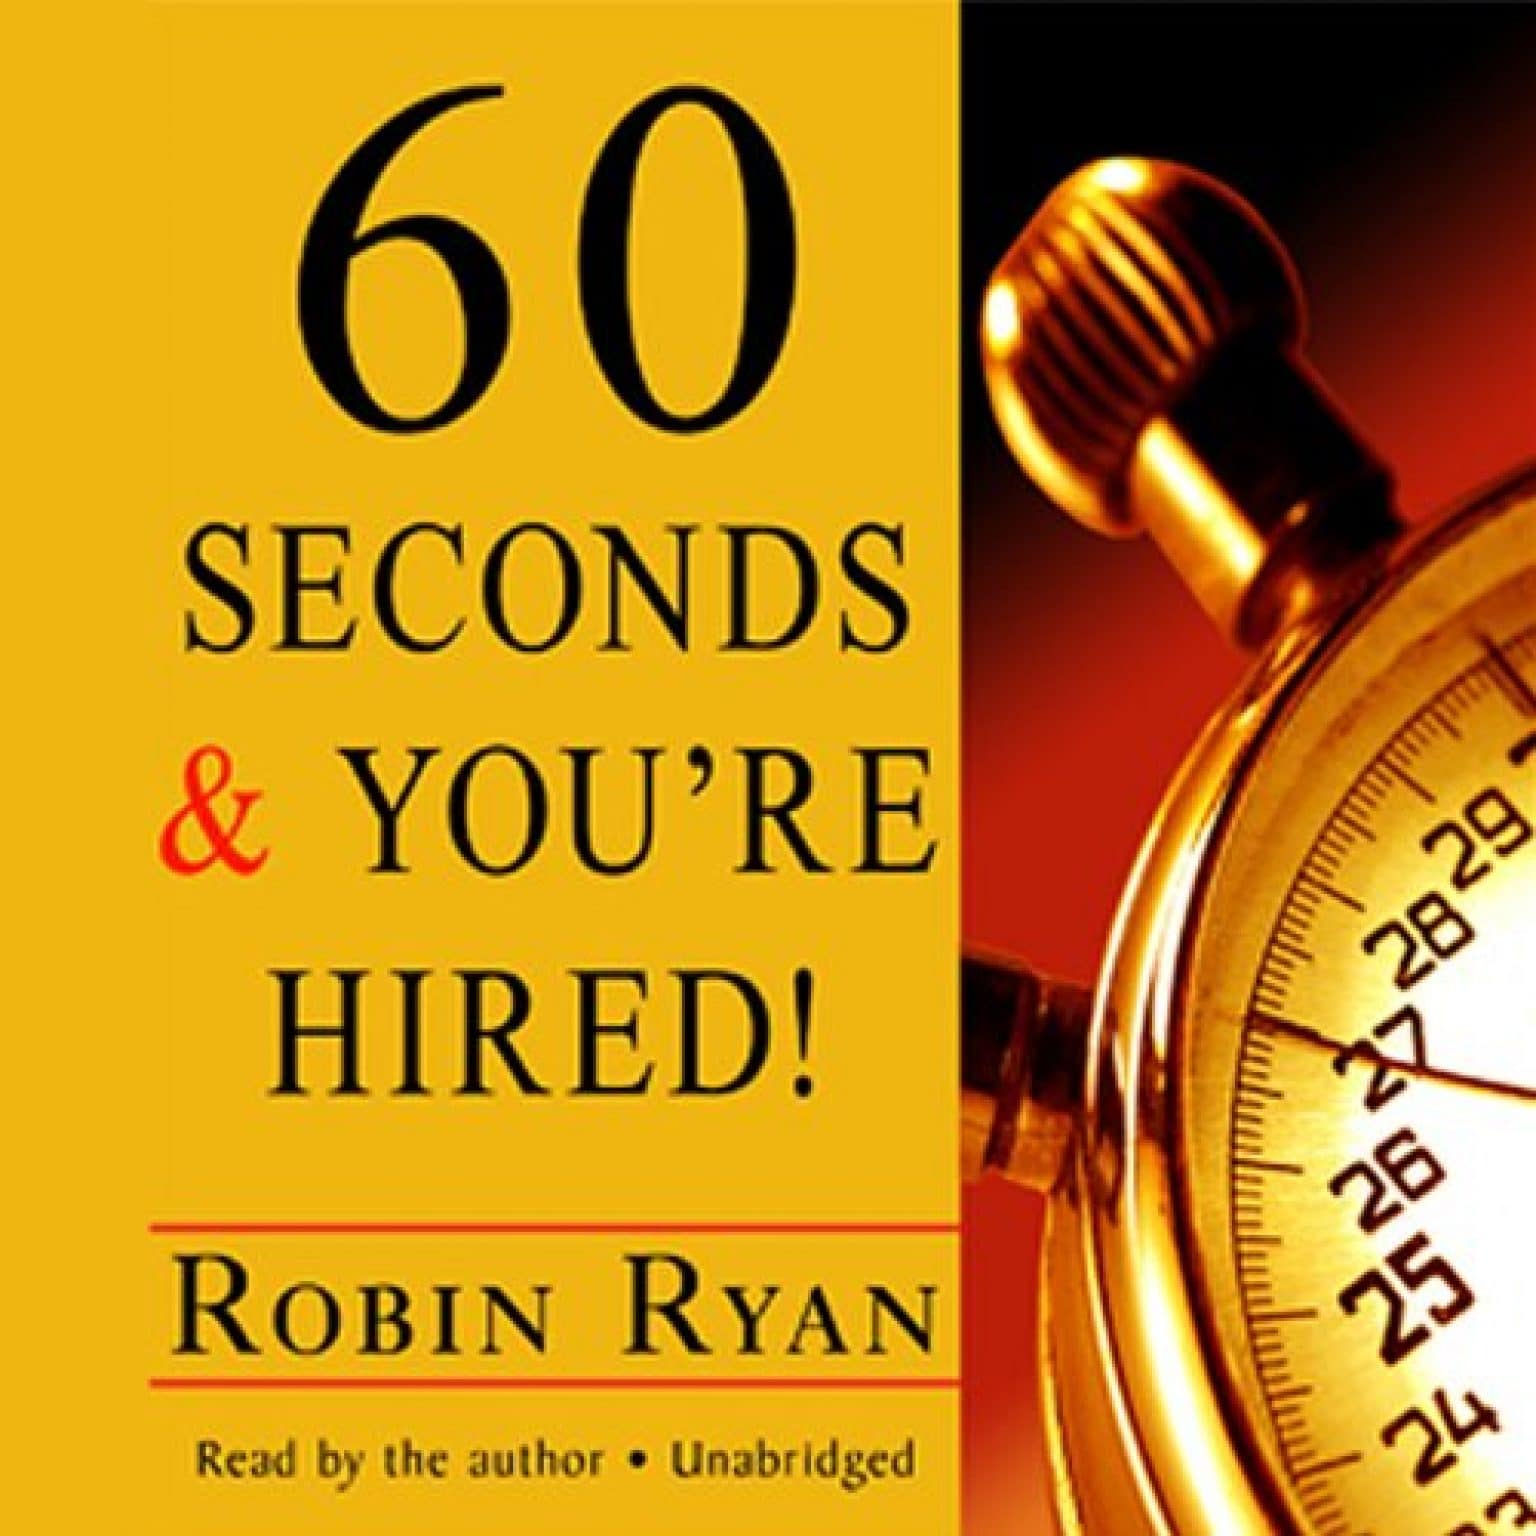 60 seconds and you' re hired pdf free download windows 10